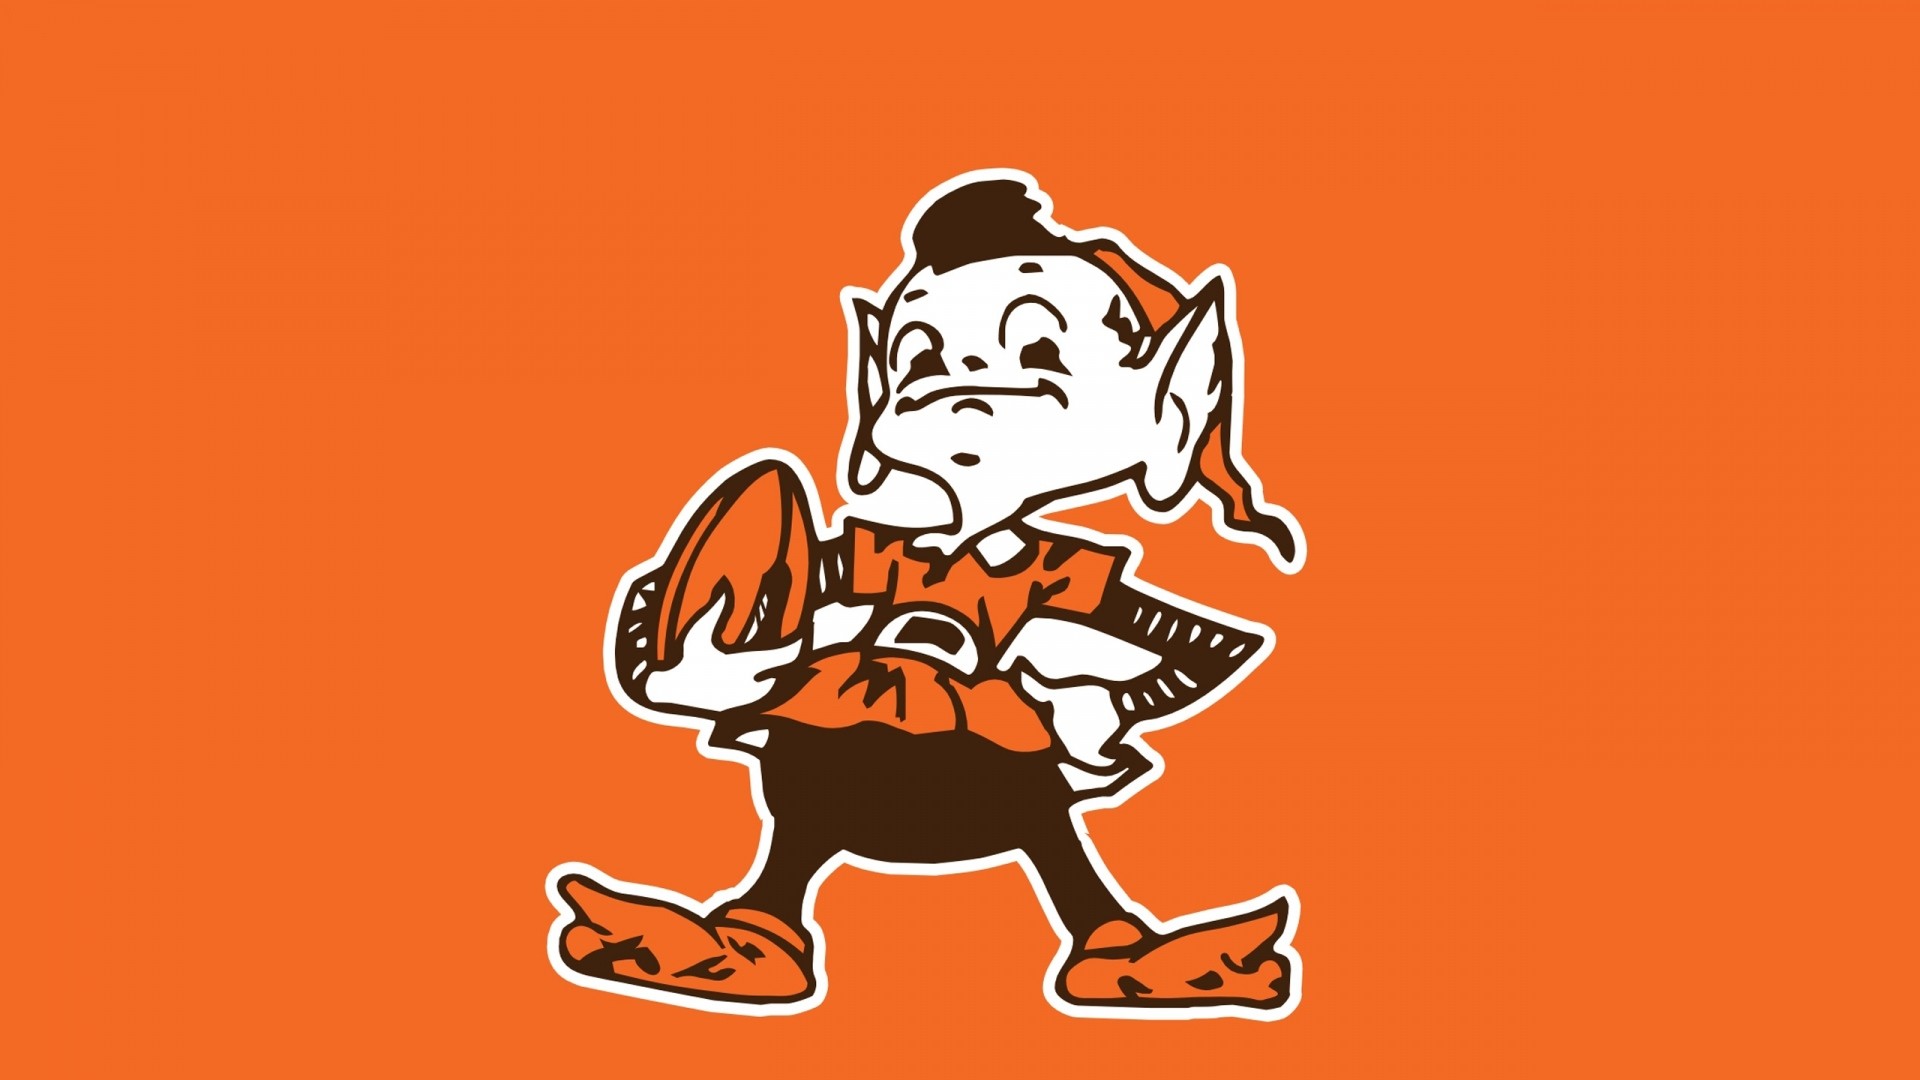 Cleveland Browns Wallpaper, Cleveland Browns Wallpapers and